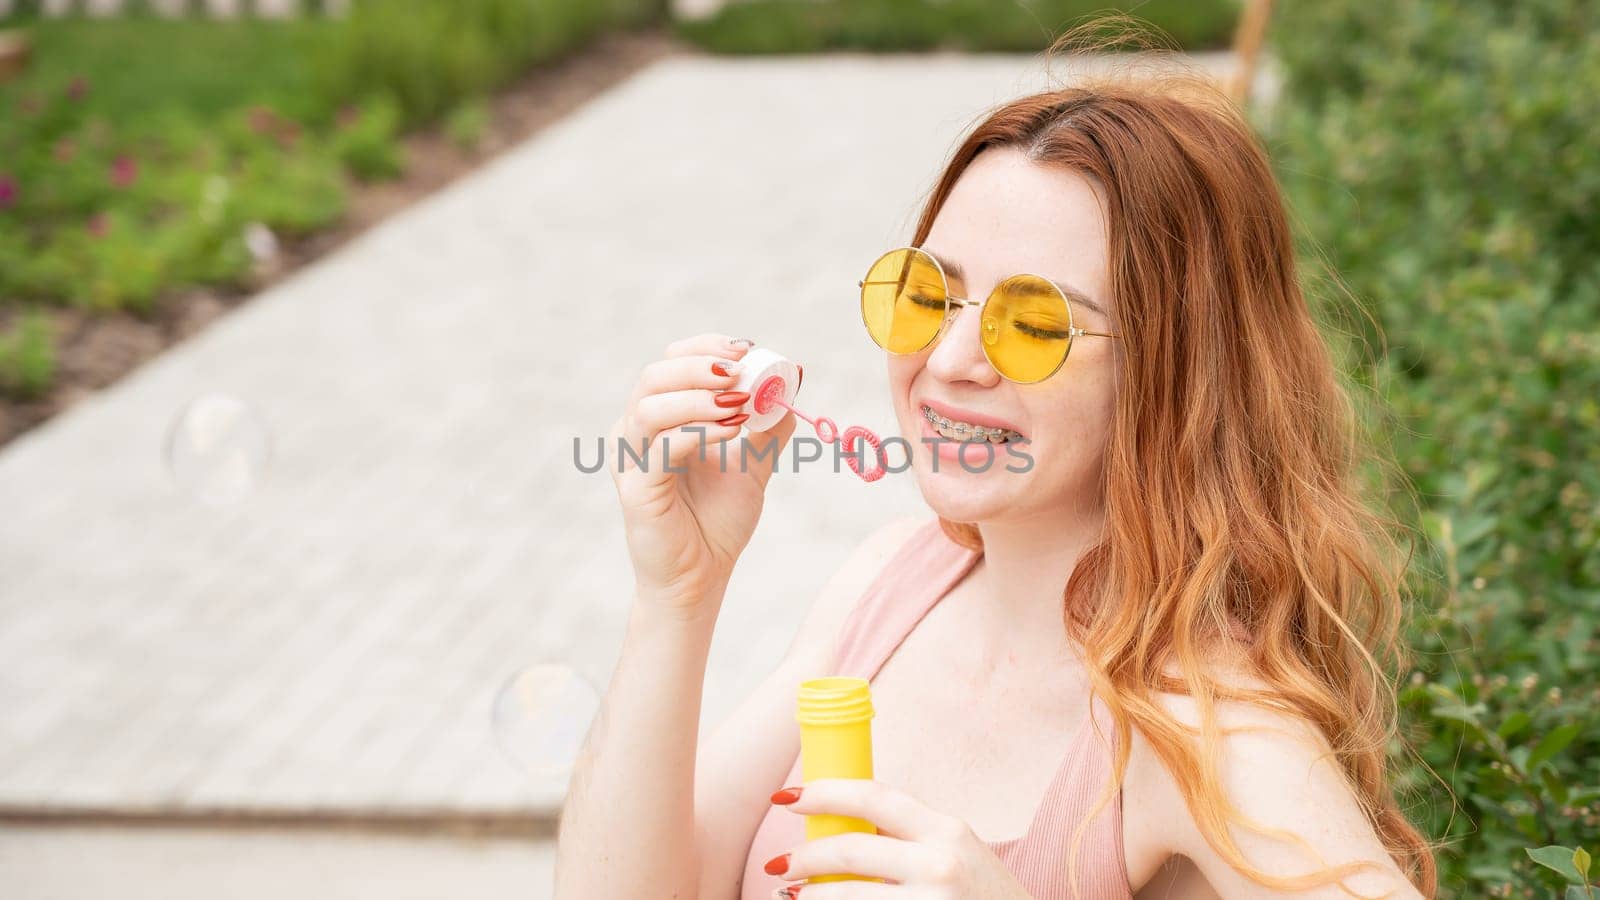 Young red-haired woman blowing soap bubbles outdoors. Girl with braces on her teeth. by mrwed54